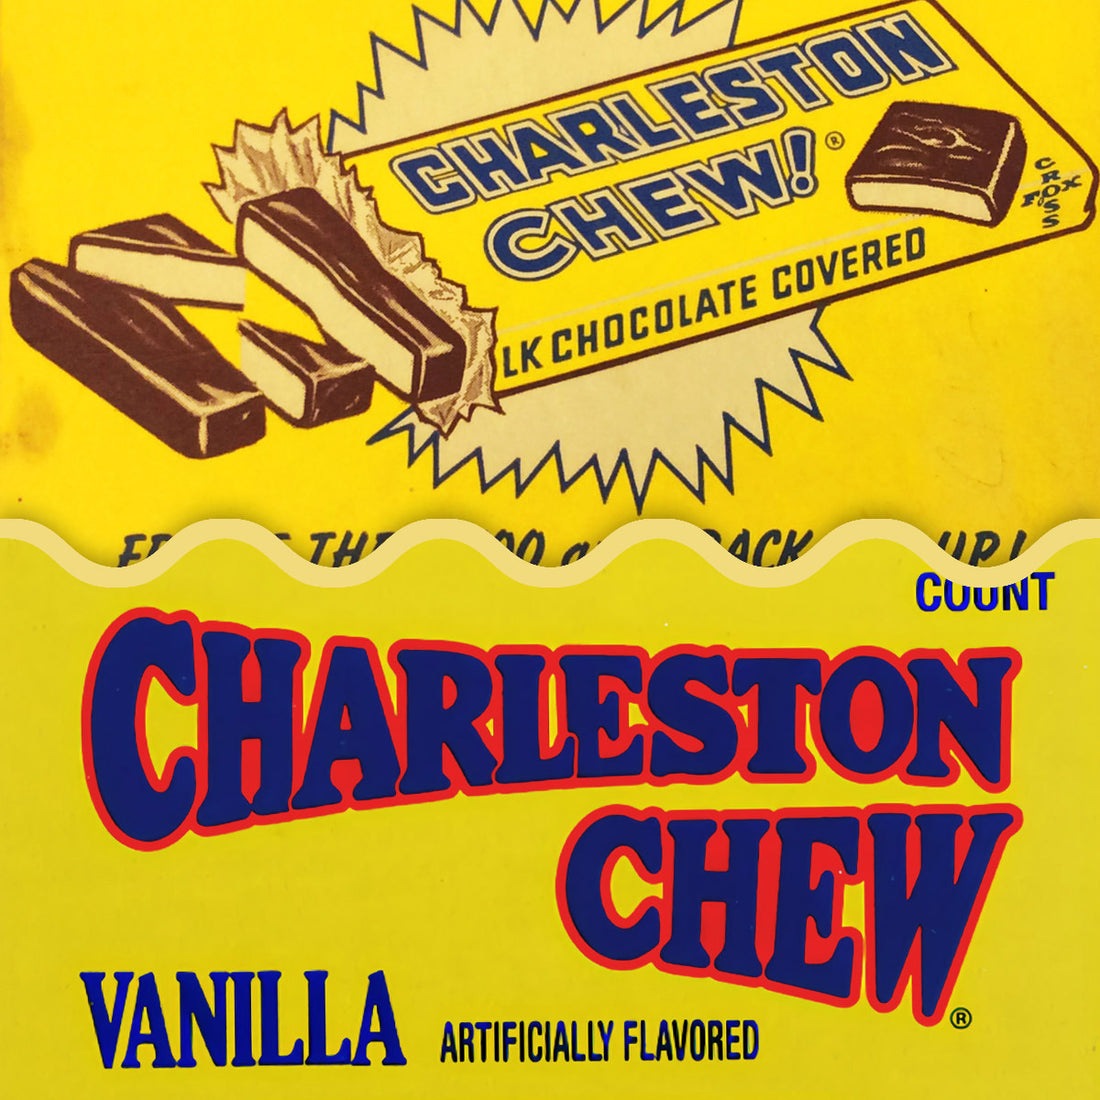 The 100 Year Old Candy Bars You Never Knew About